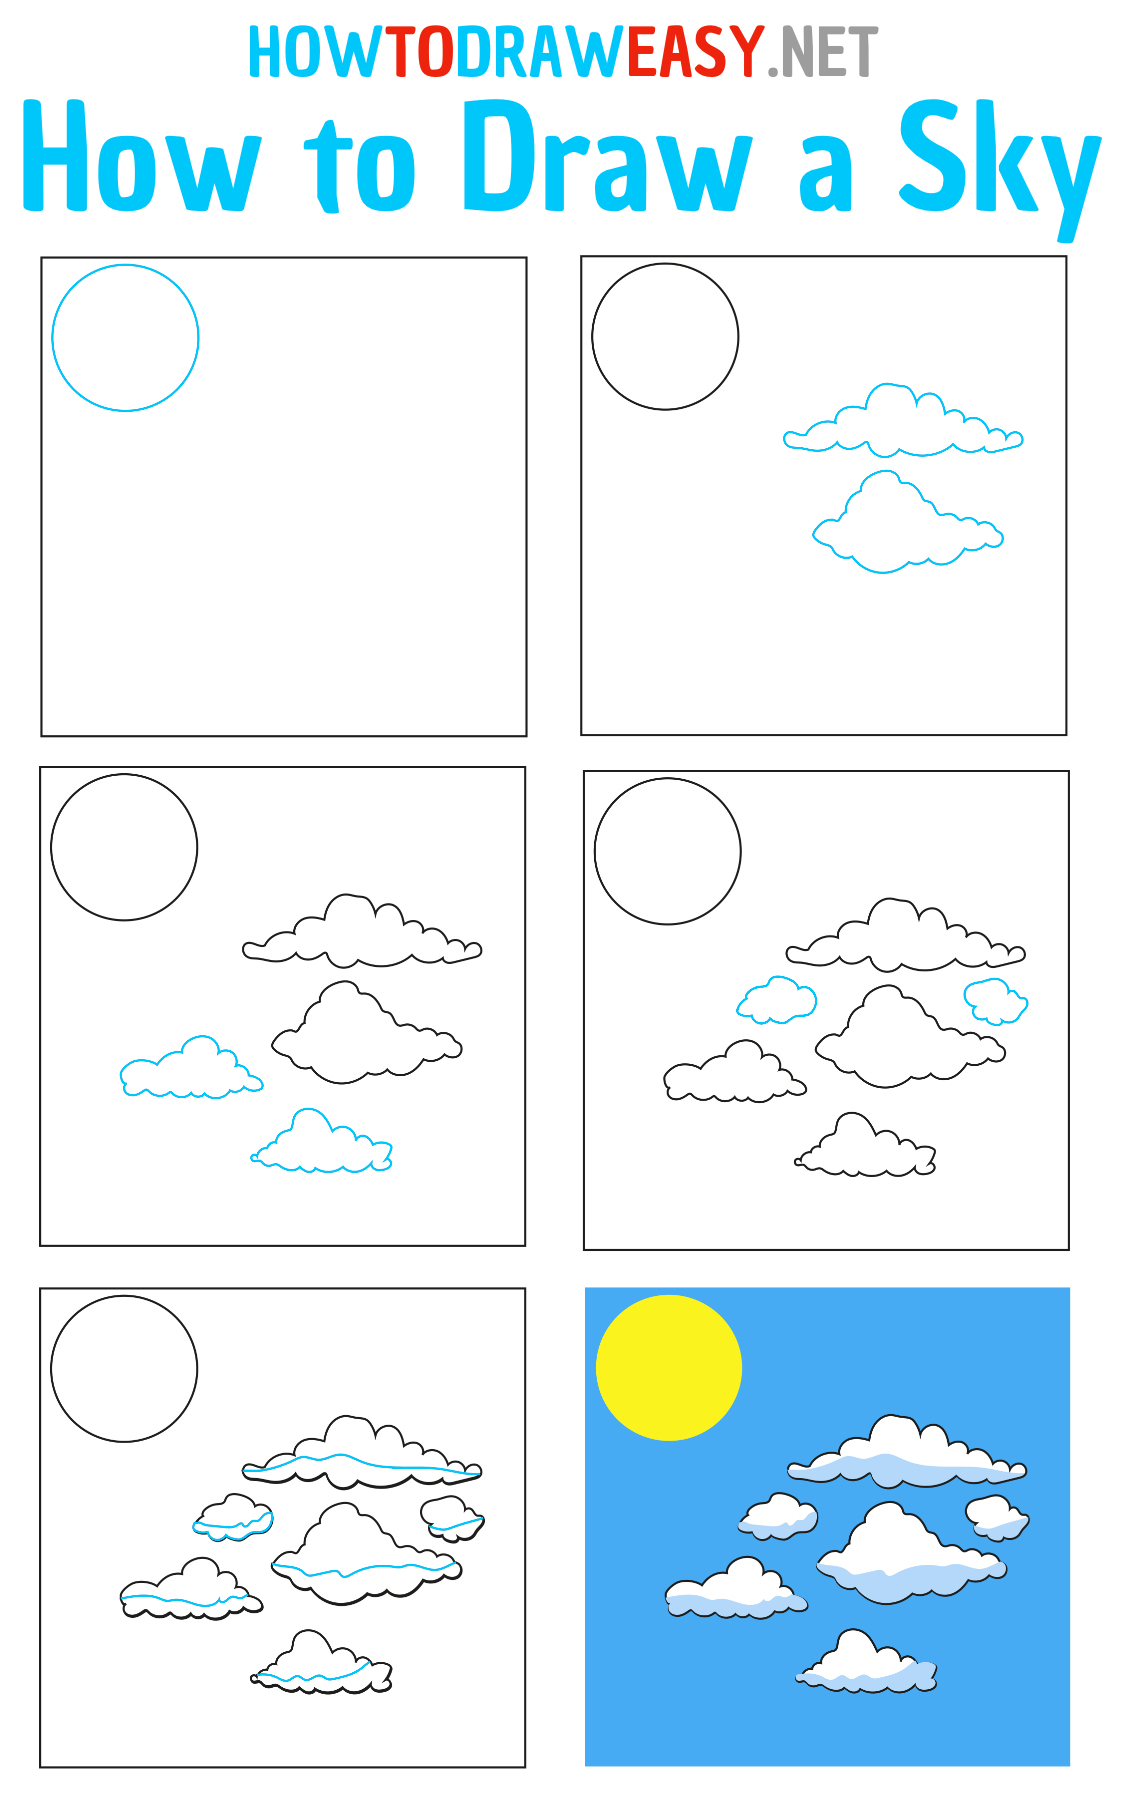 How to Draw a Sky Step by Step